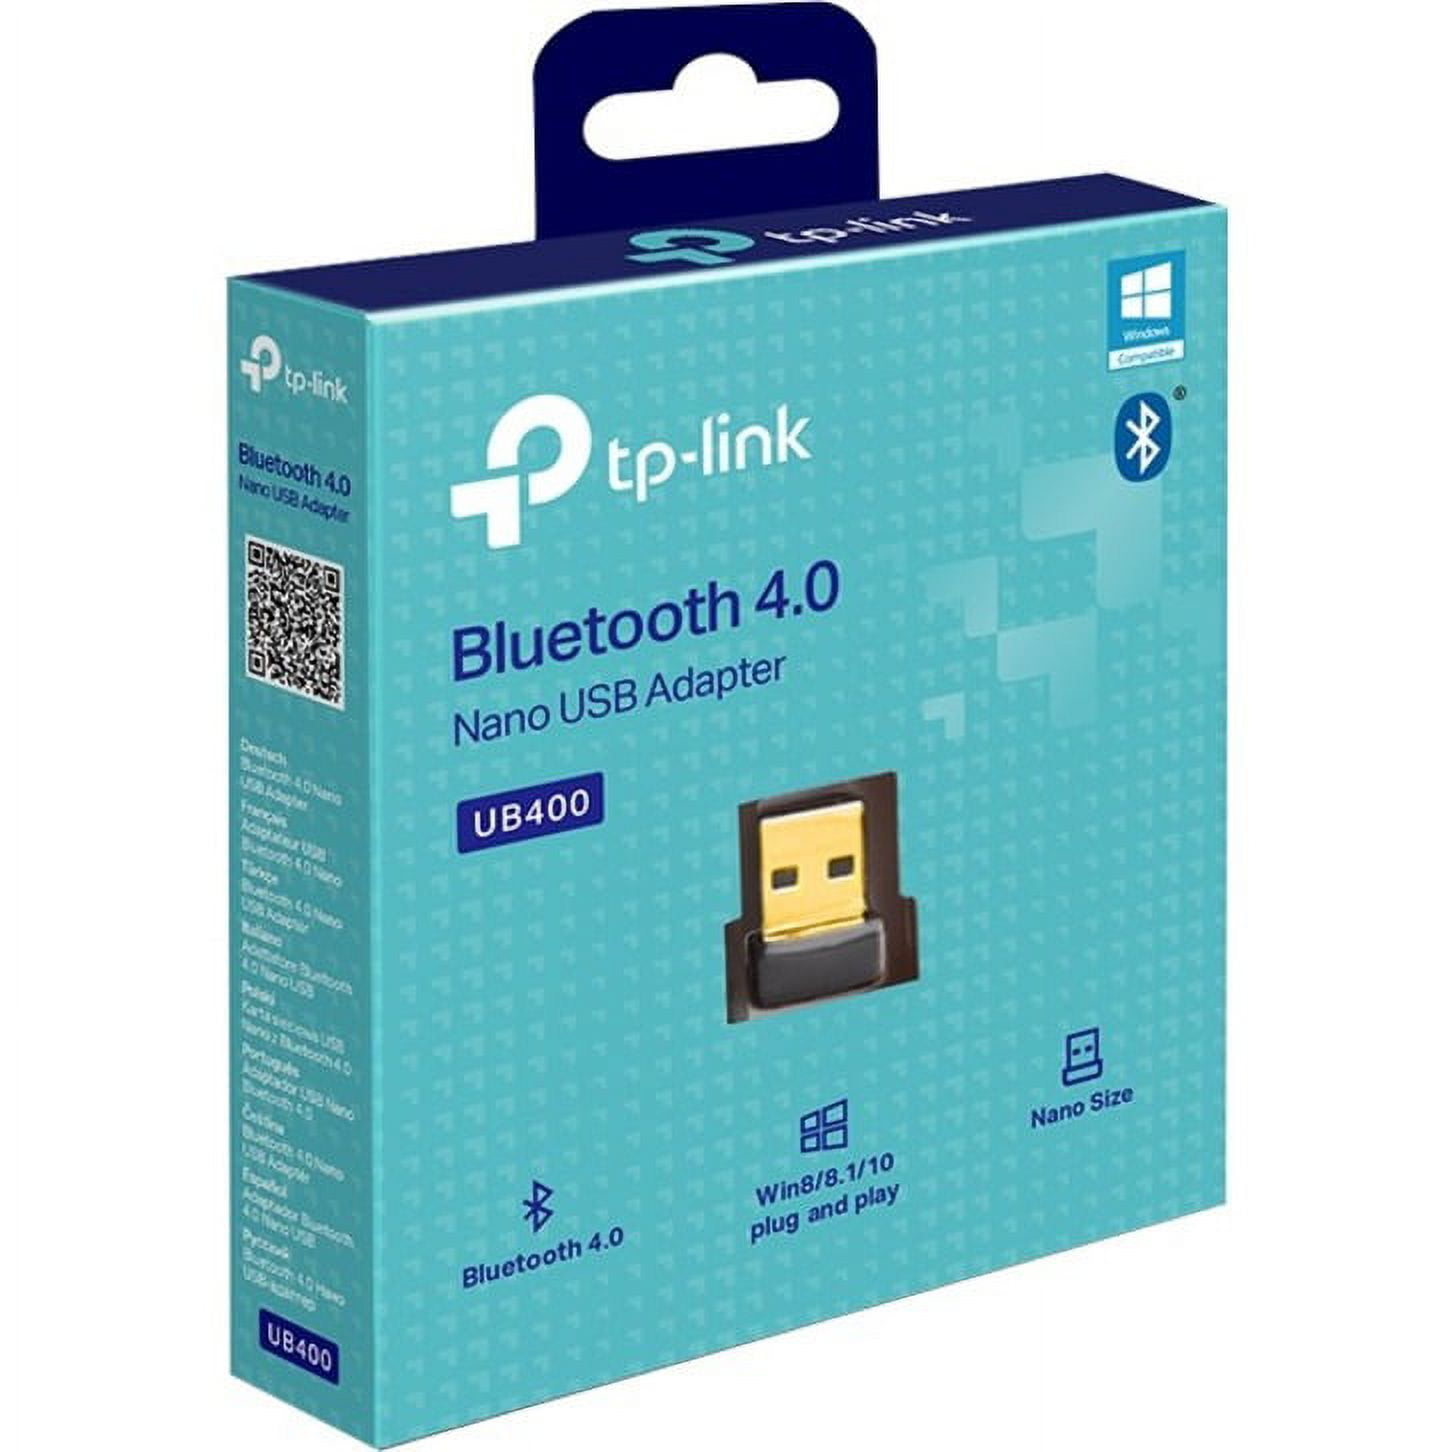 Review of tp-link UB400 bluetooth usb dongle (Best cheap plug&play bluetooth  dongle on gnu/linux?) : r/linuxhardware